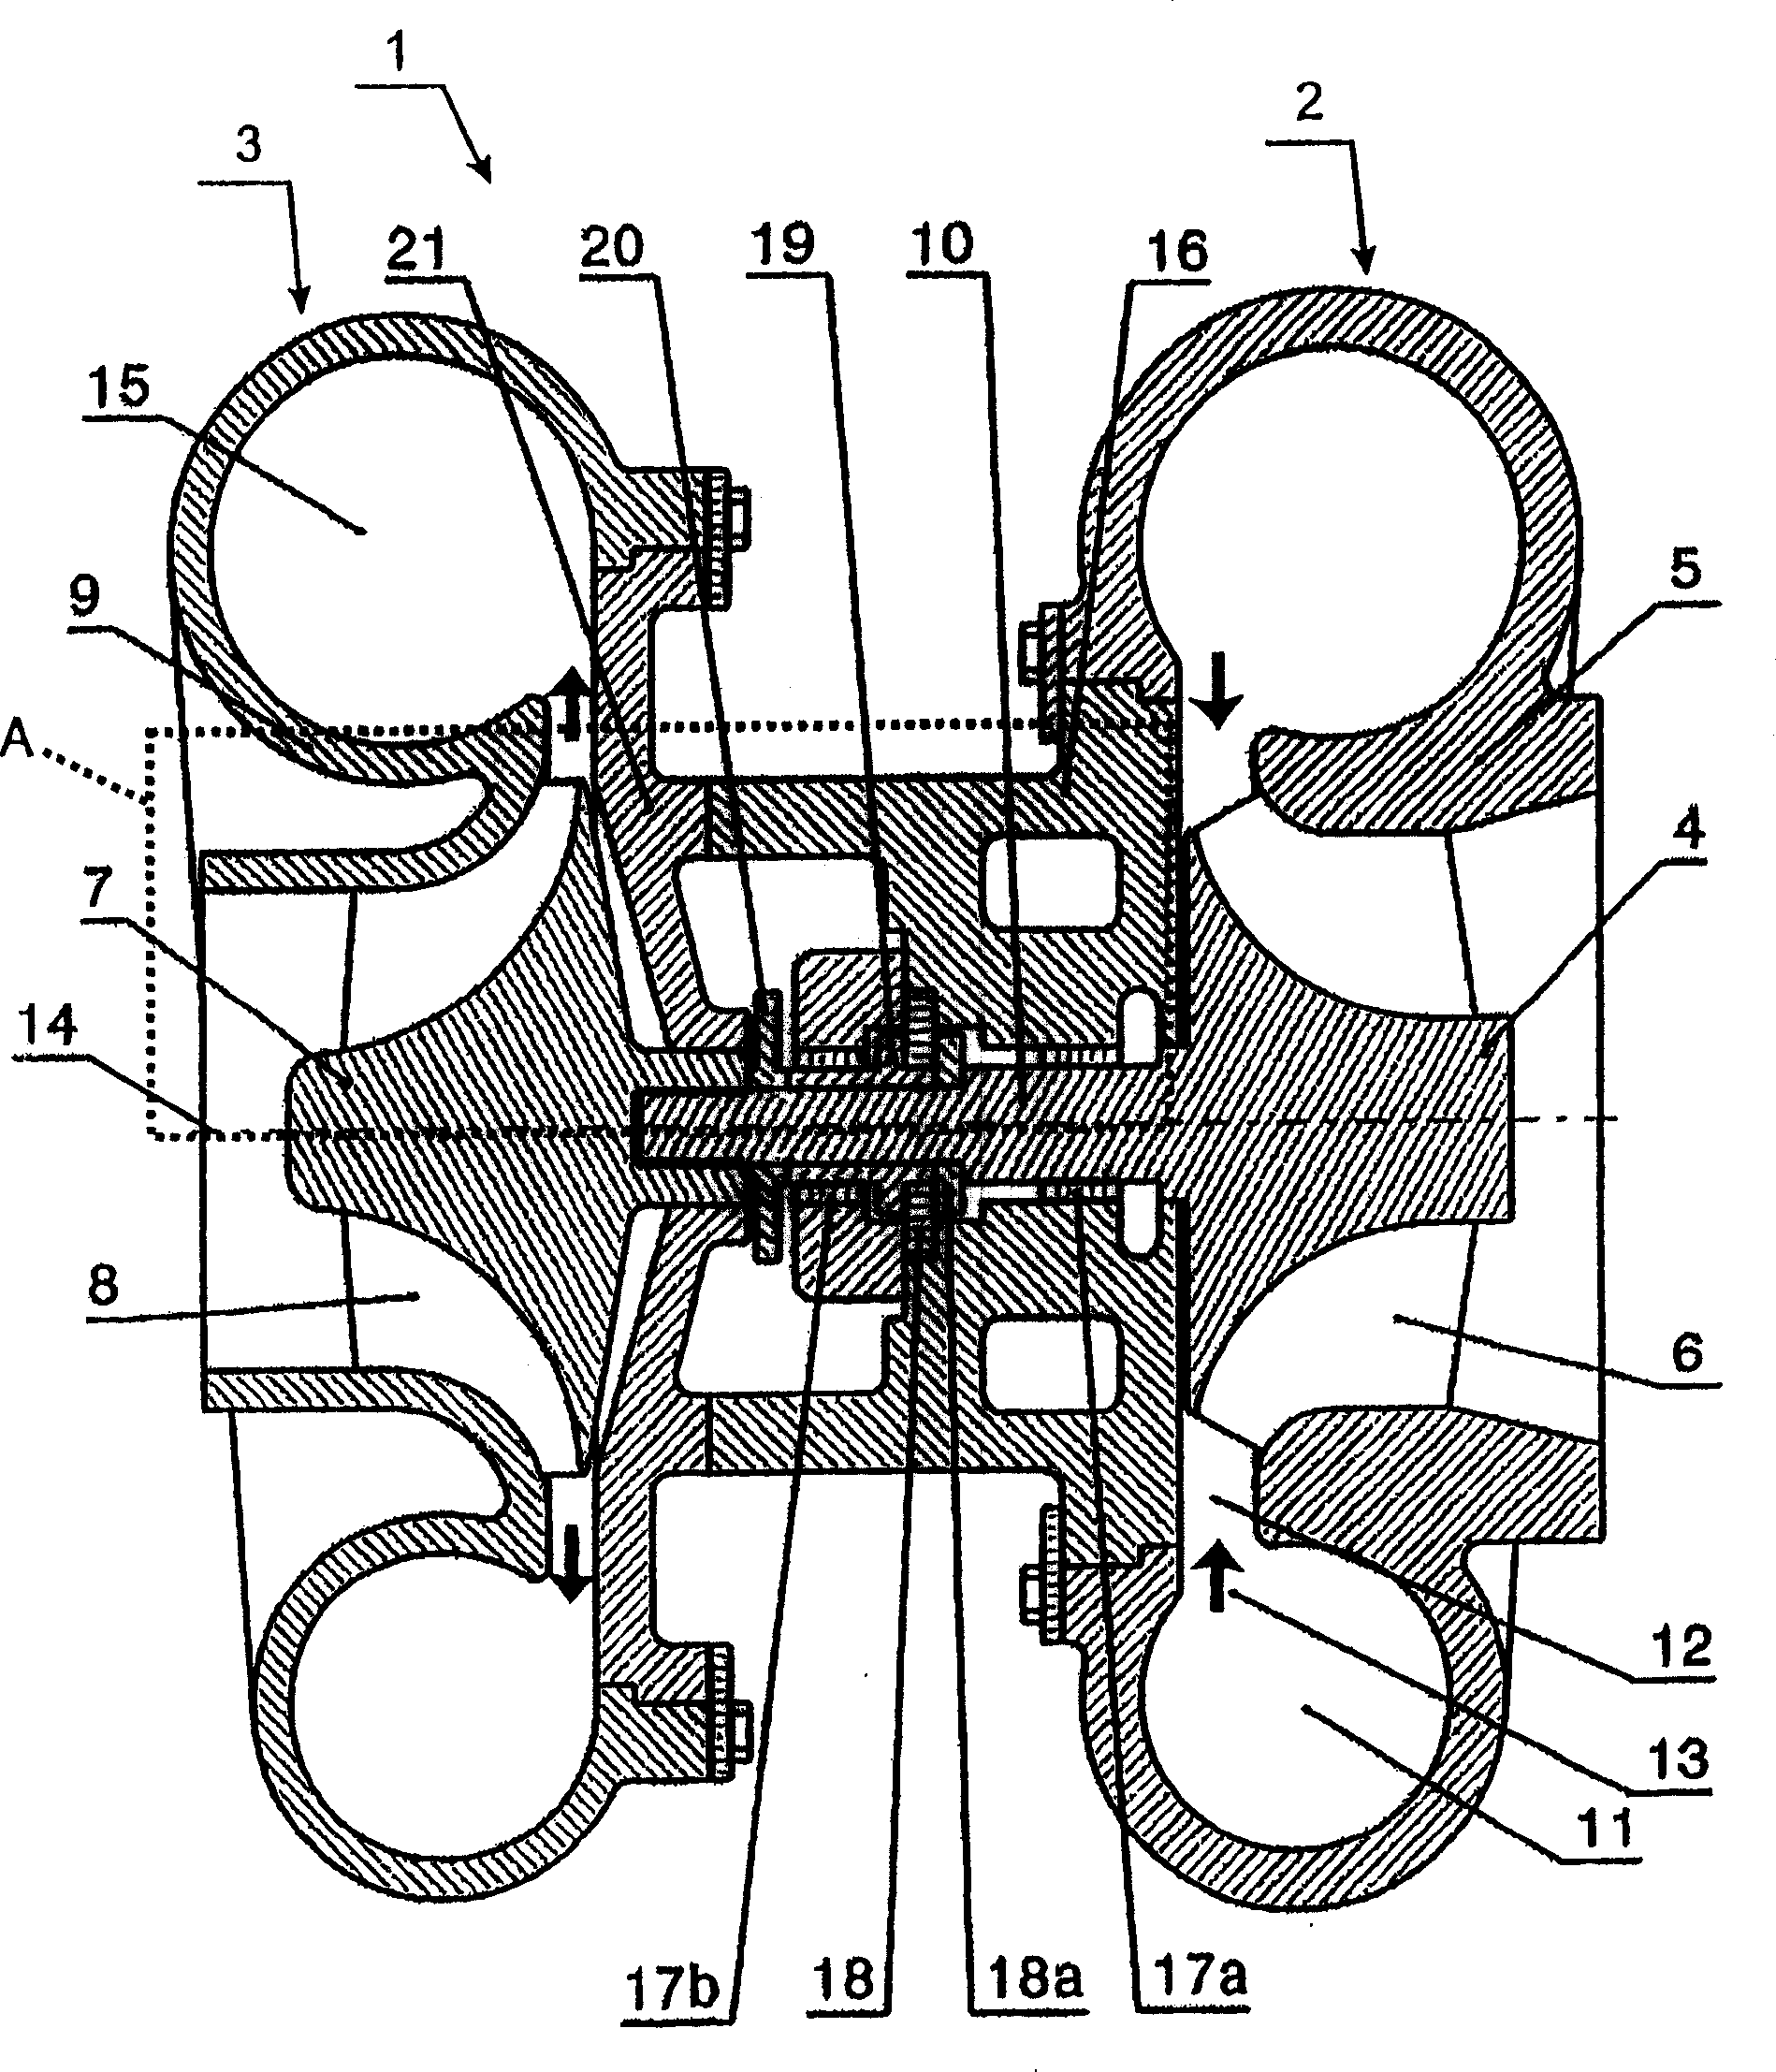 Turbo charger with means on the shaft for axially securing of said shaft if the compressor wheel bursts